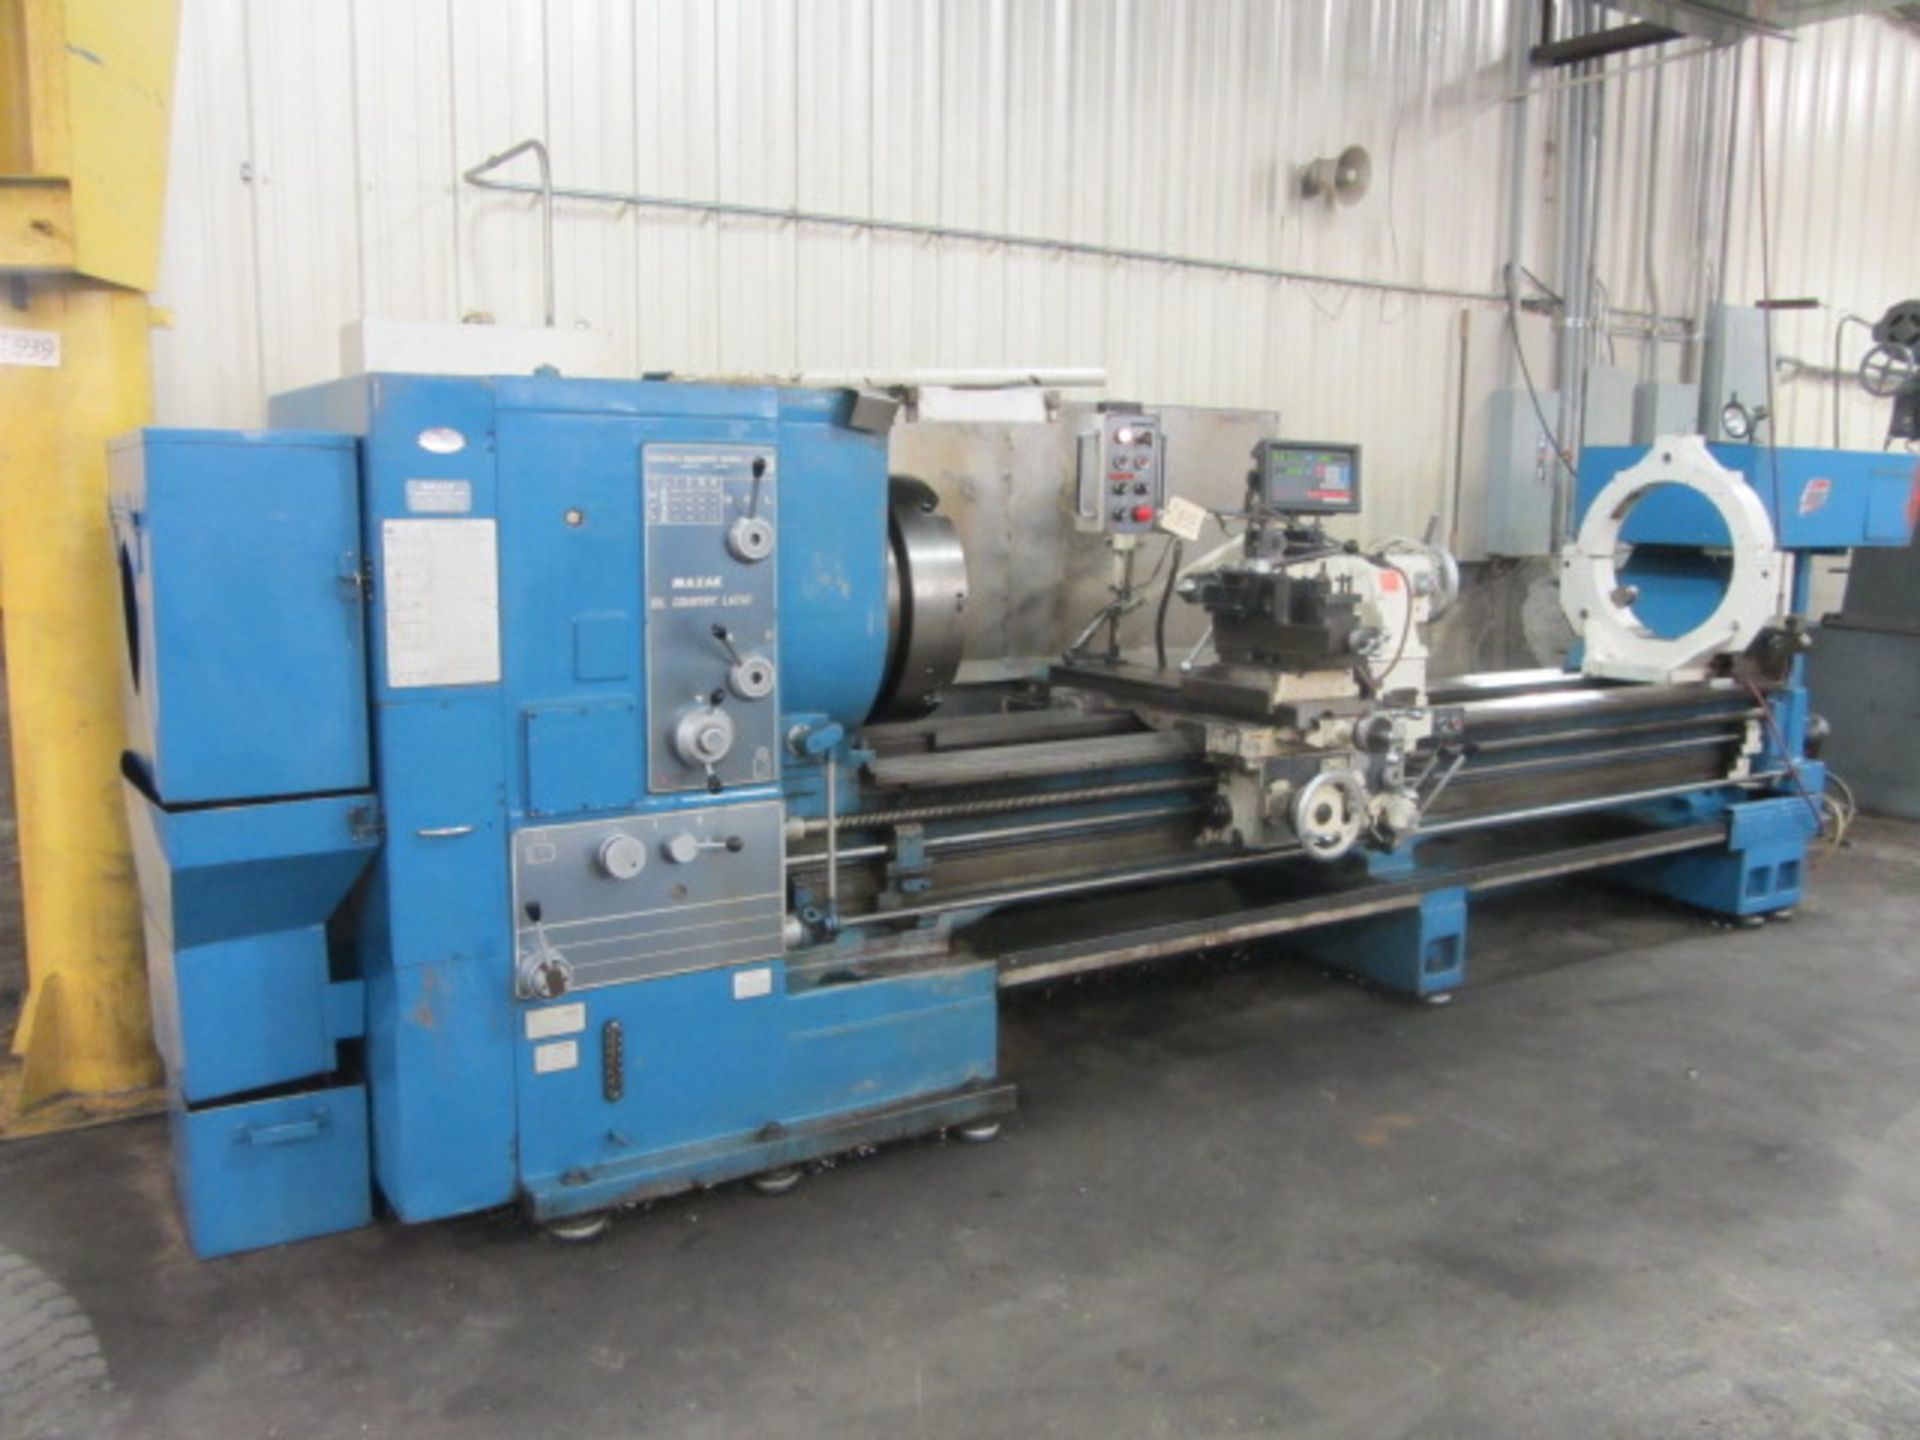 Mazak Heavy Duty Oil Country Engine Lathe with Dual 24'' 4-Jaw Chucks, 34'' Swing Over Bed x 100''